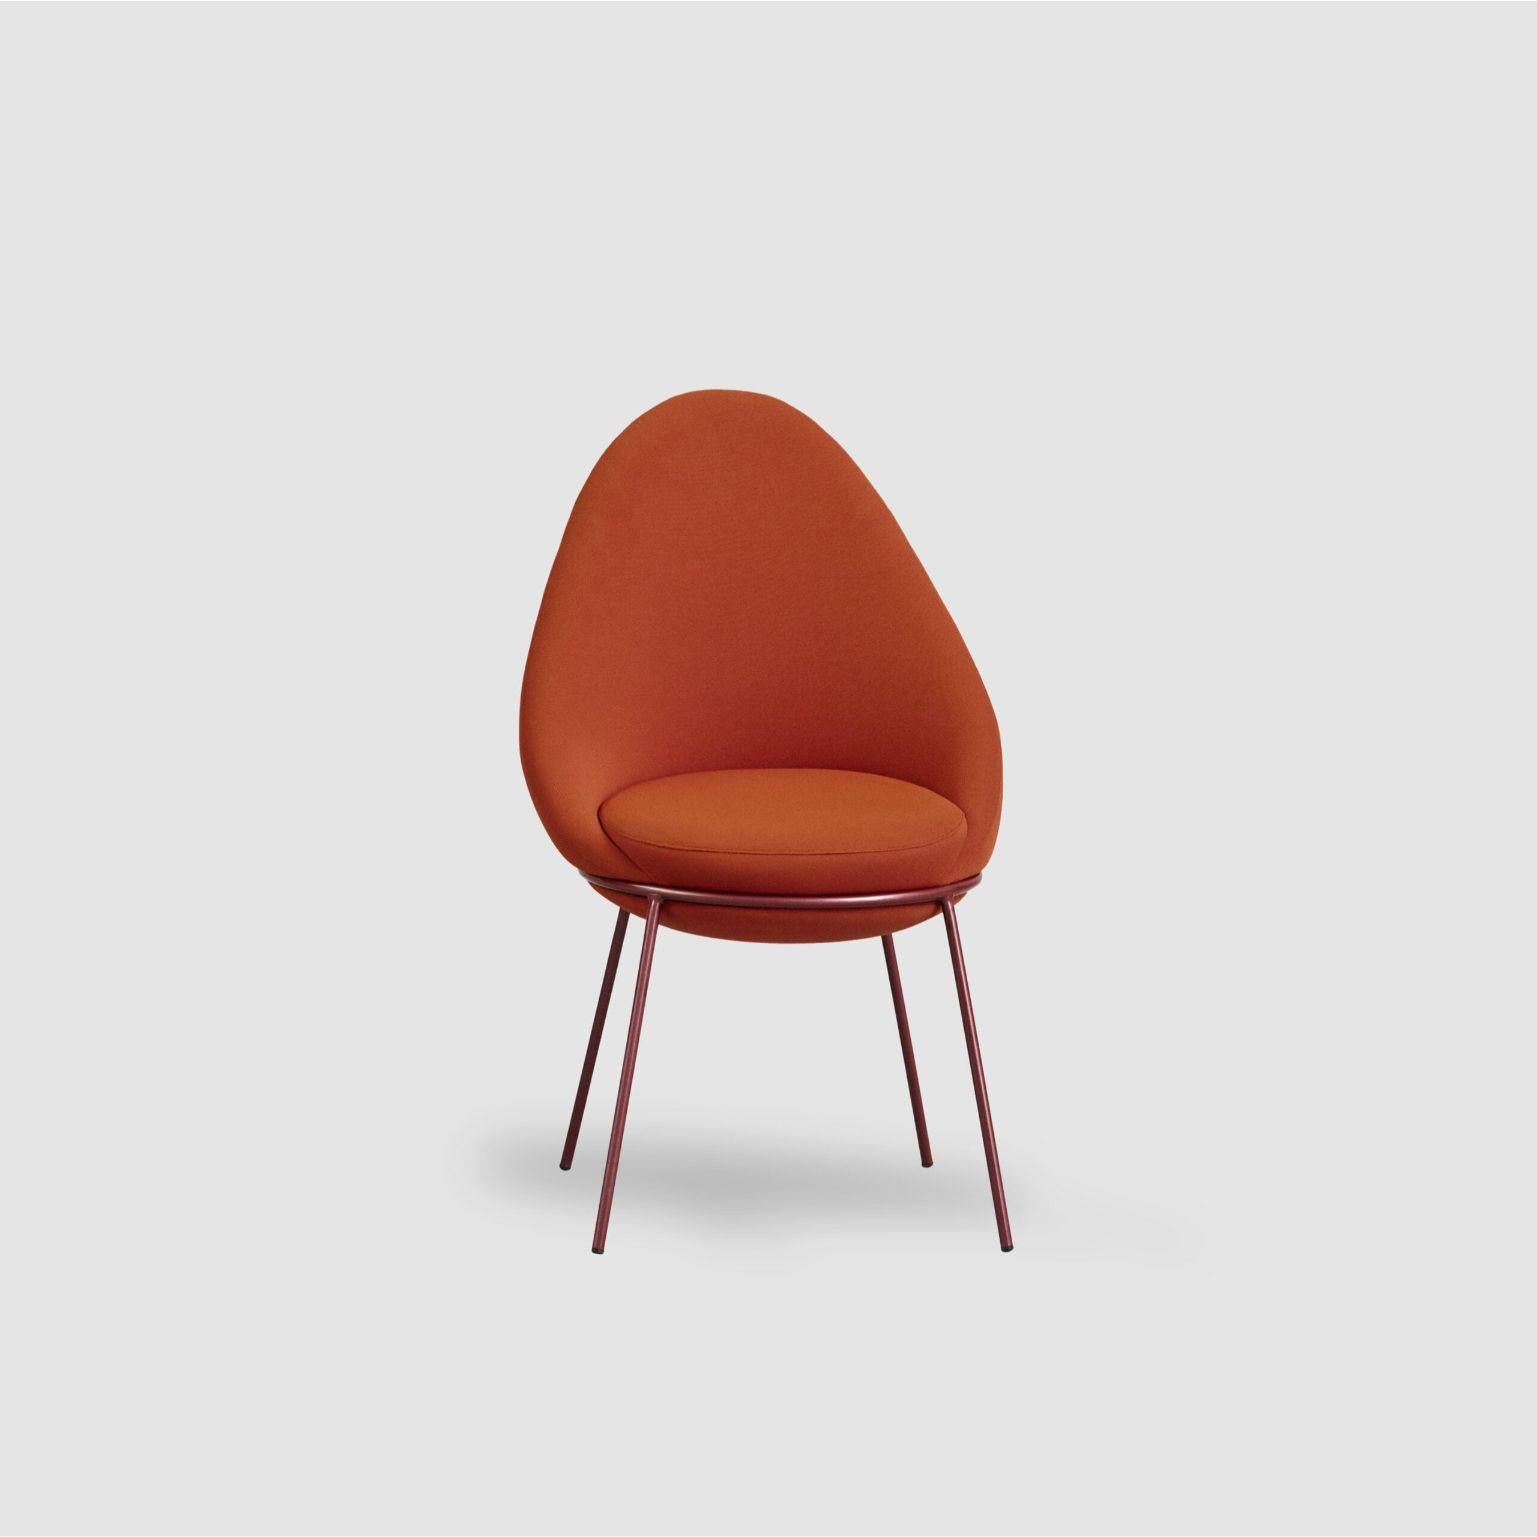 Nest chair by Pepe Albargues
Dimensions: W 54, D 56, H 96, seat 46
Materials: Iron structure and MDF board
Foam CMHR (high resilience and flame retardant) for all our cushion filling systems
Painted or chromed legs.

Also available: Different